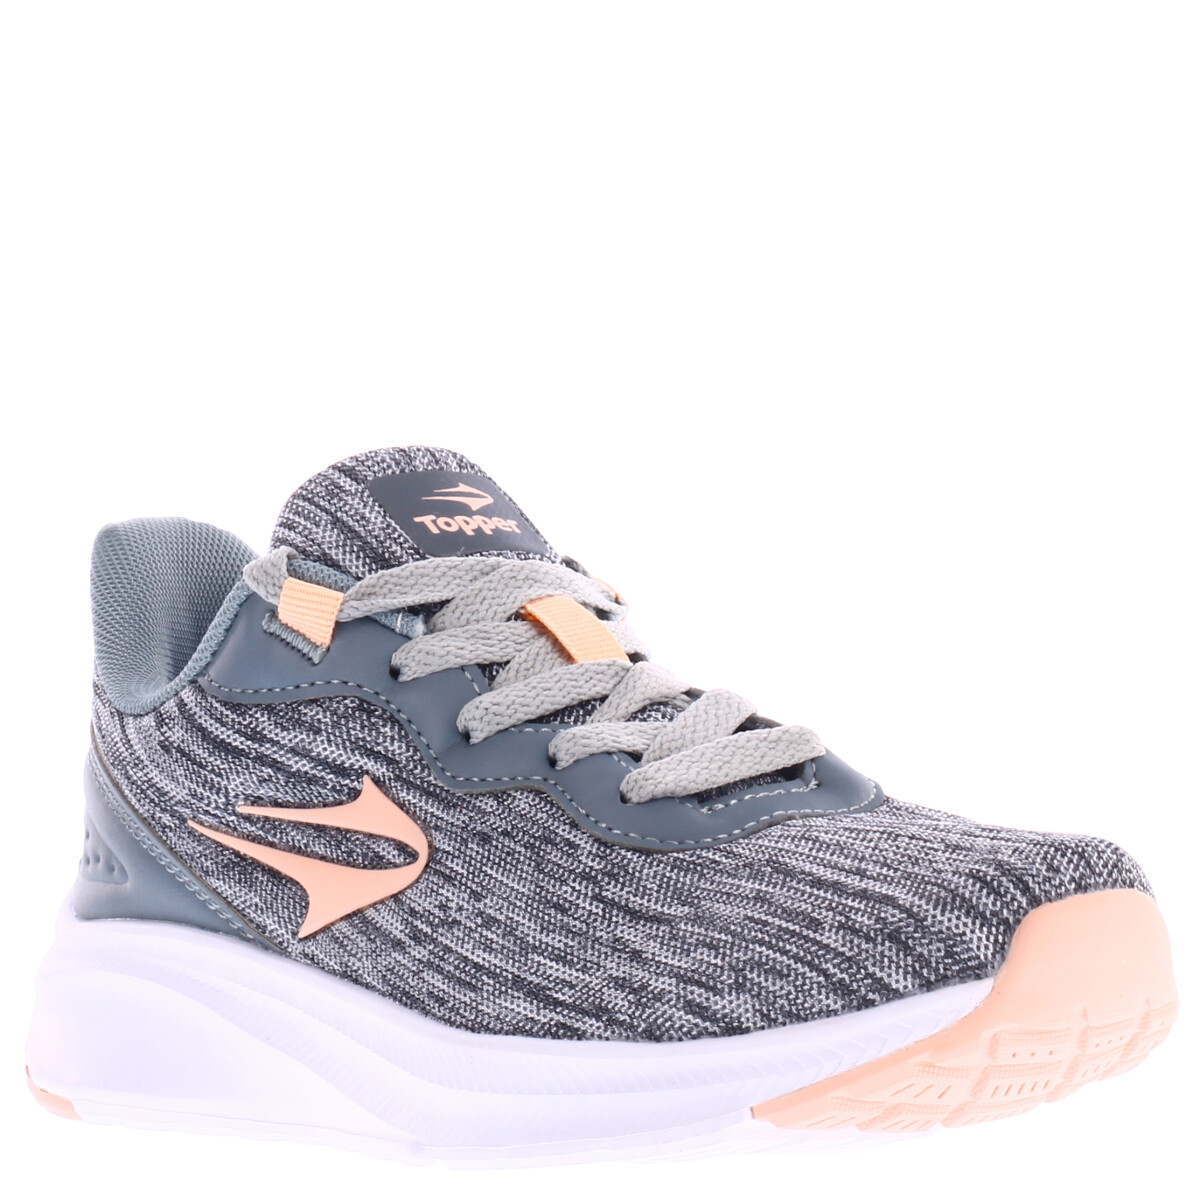 Core Running Wns Topper - Gris/Rosa 